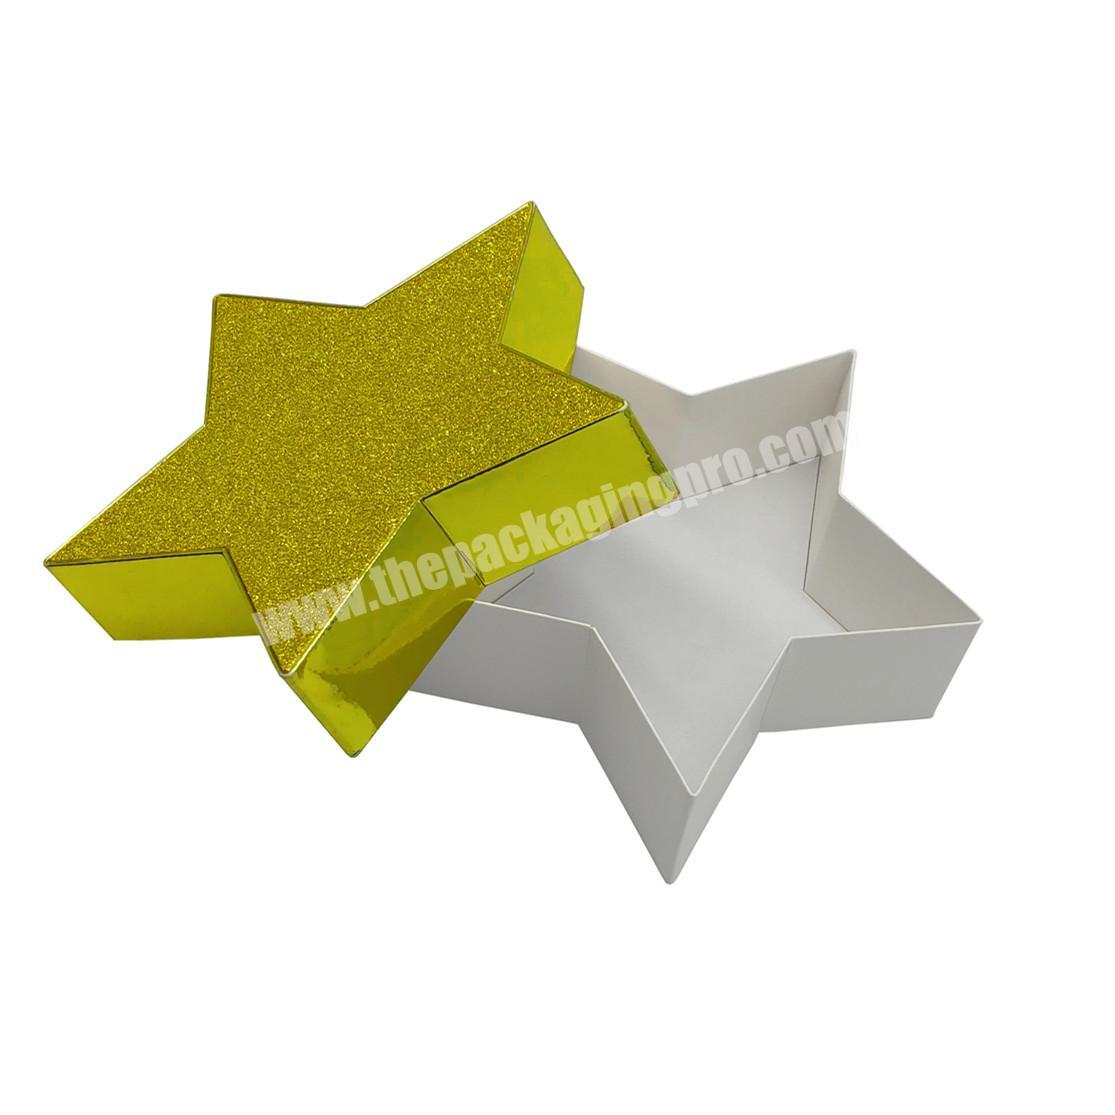 Golden Glittery Star Shaped Paper Box Pentastar Packaging Box Candy Chocolate Paper Gift Box